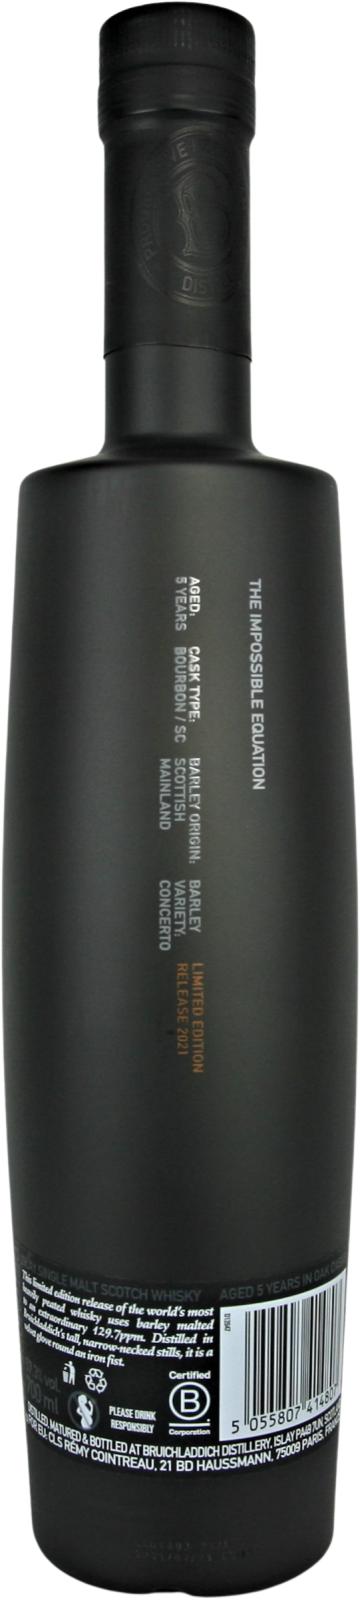 Octomore Edition 12.2 &#x2F; 129.7 PPM